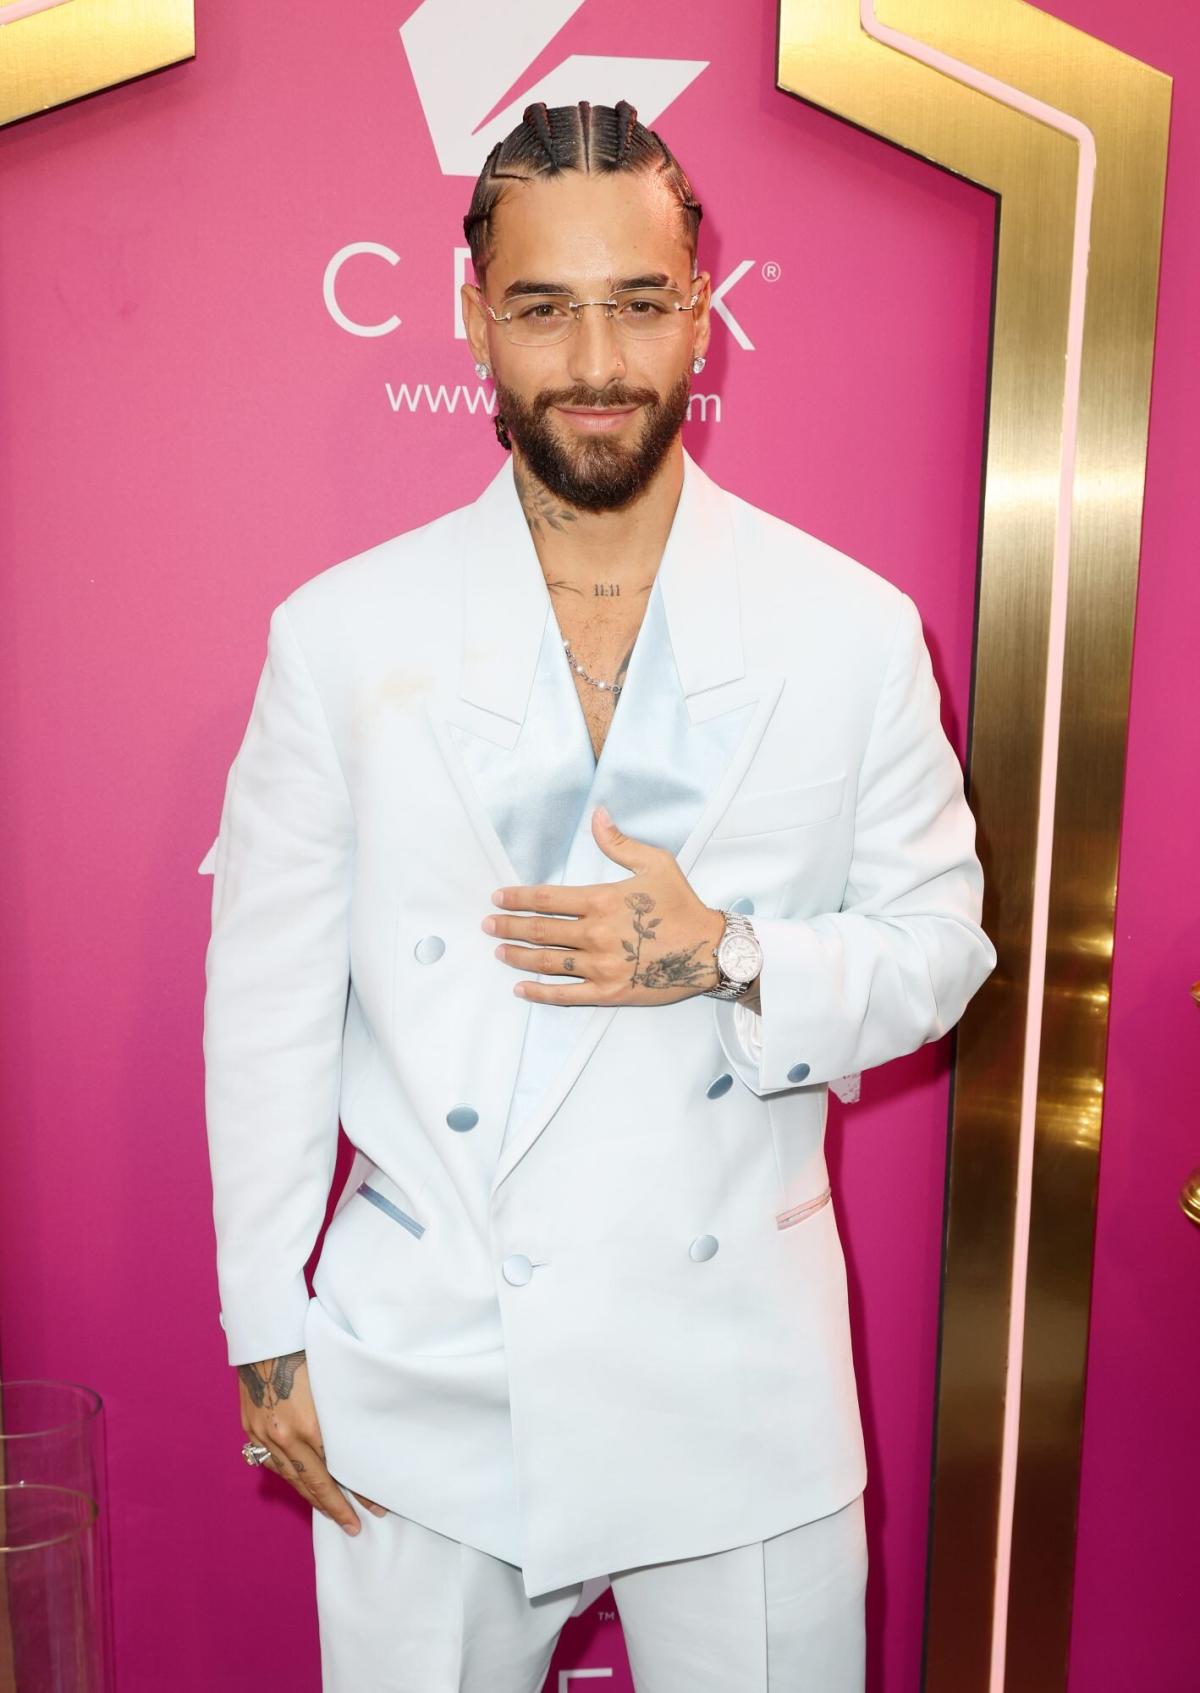 The One Thing Maluma Wants All of His Fans to Wear at His Concert